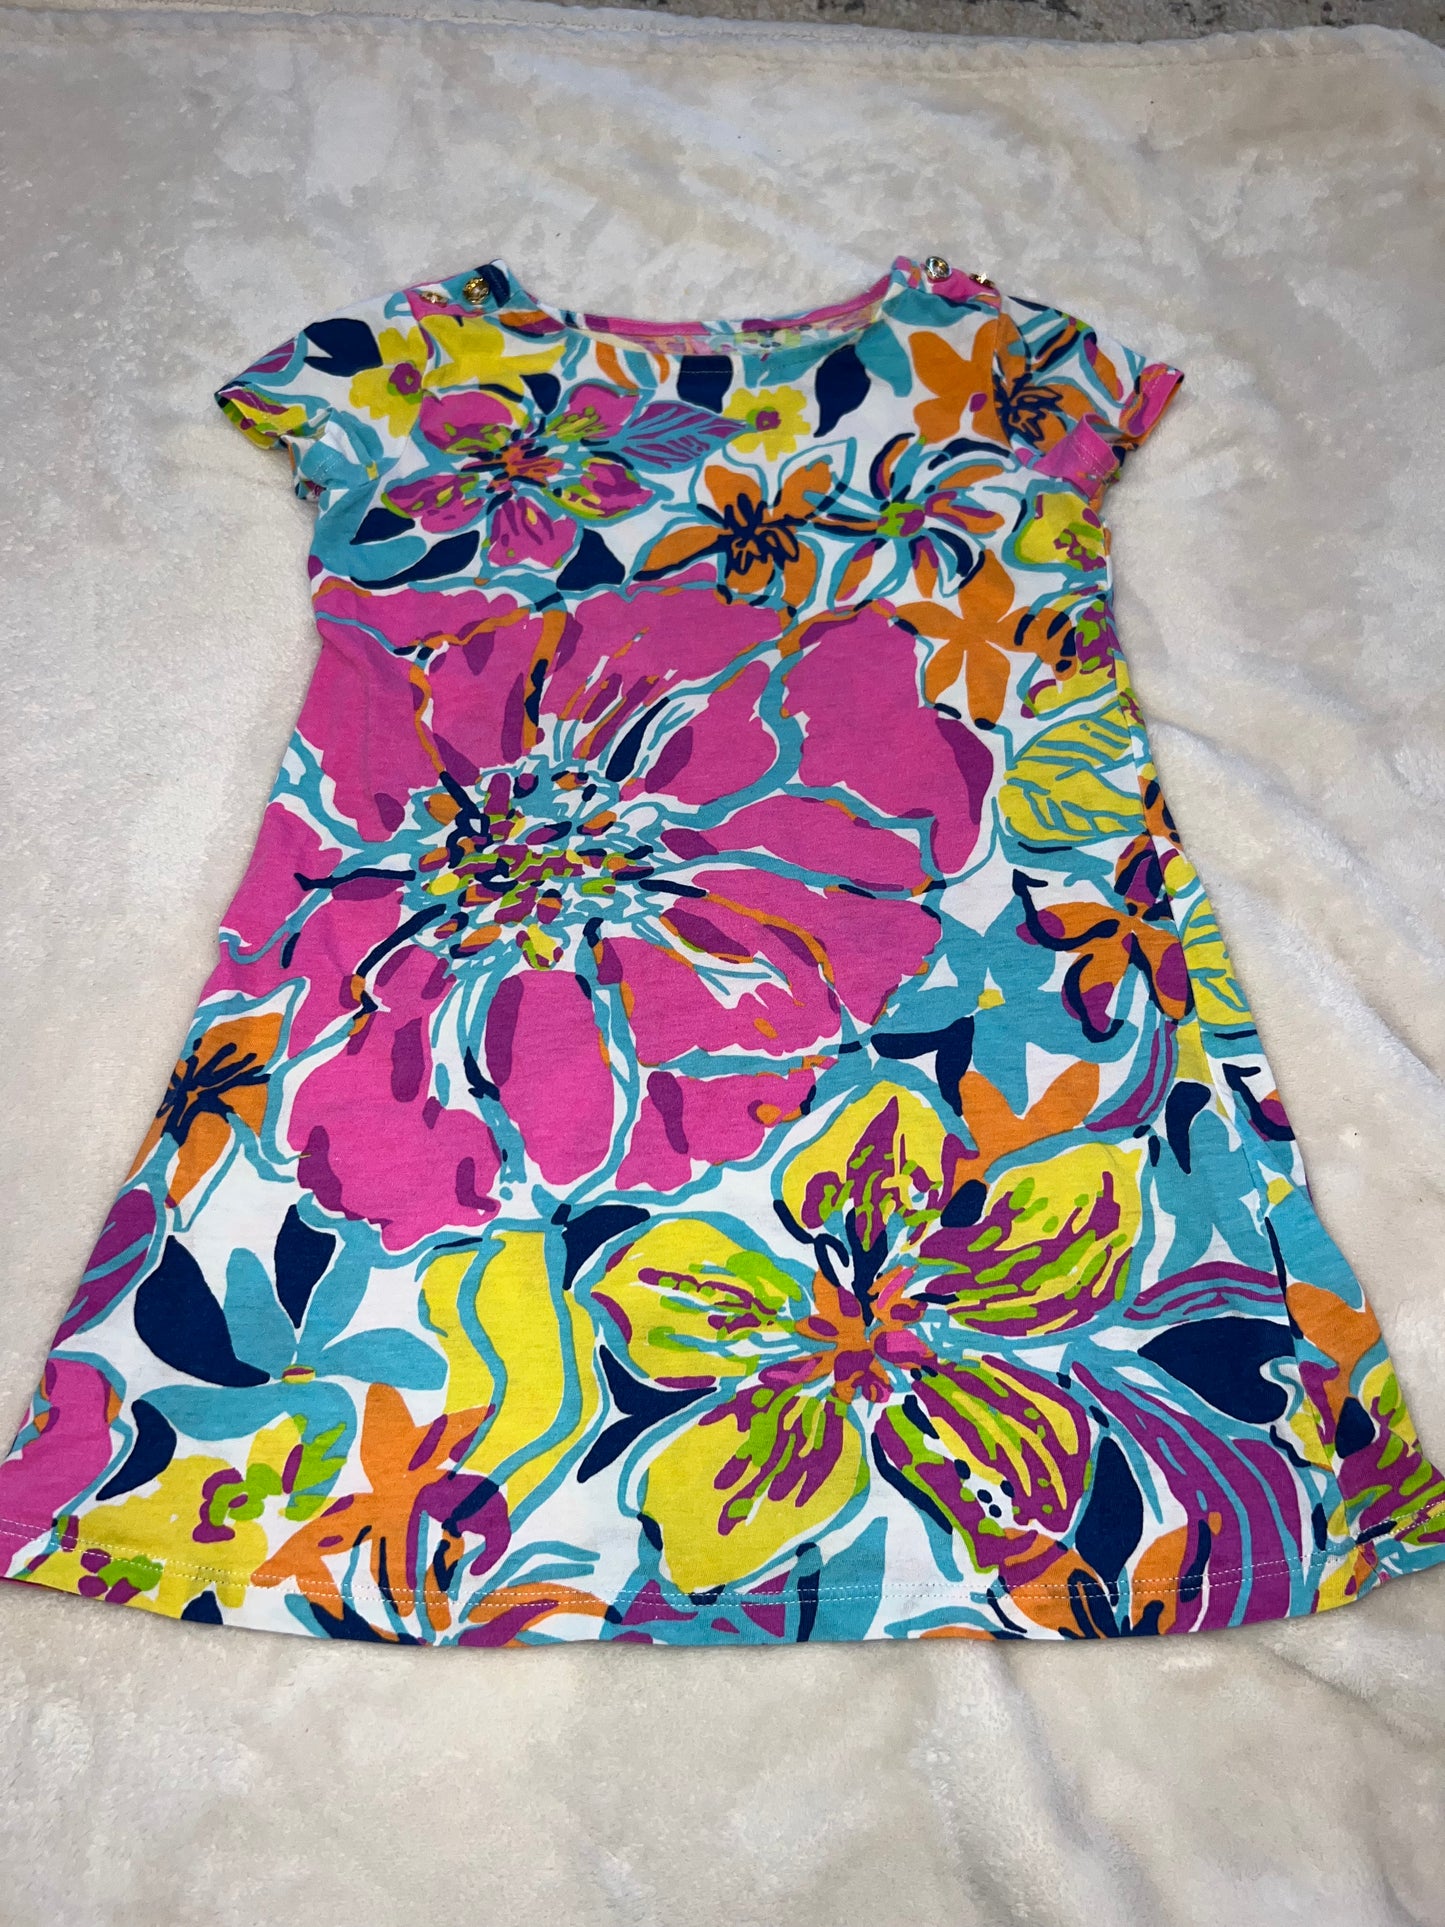 Girls small 4-5T Lilly Pulitzer